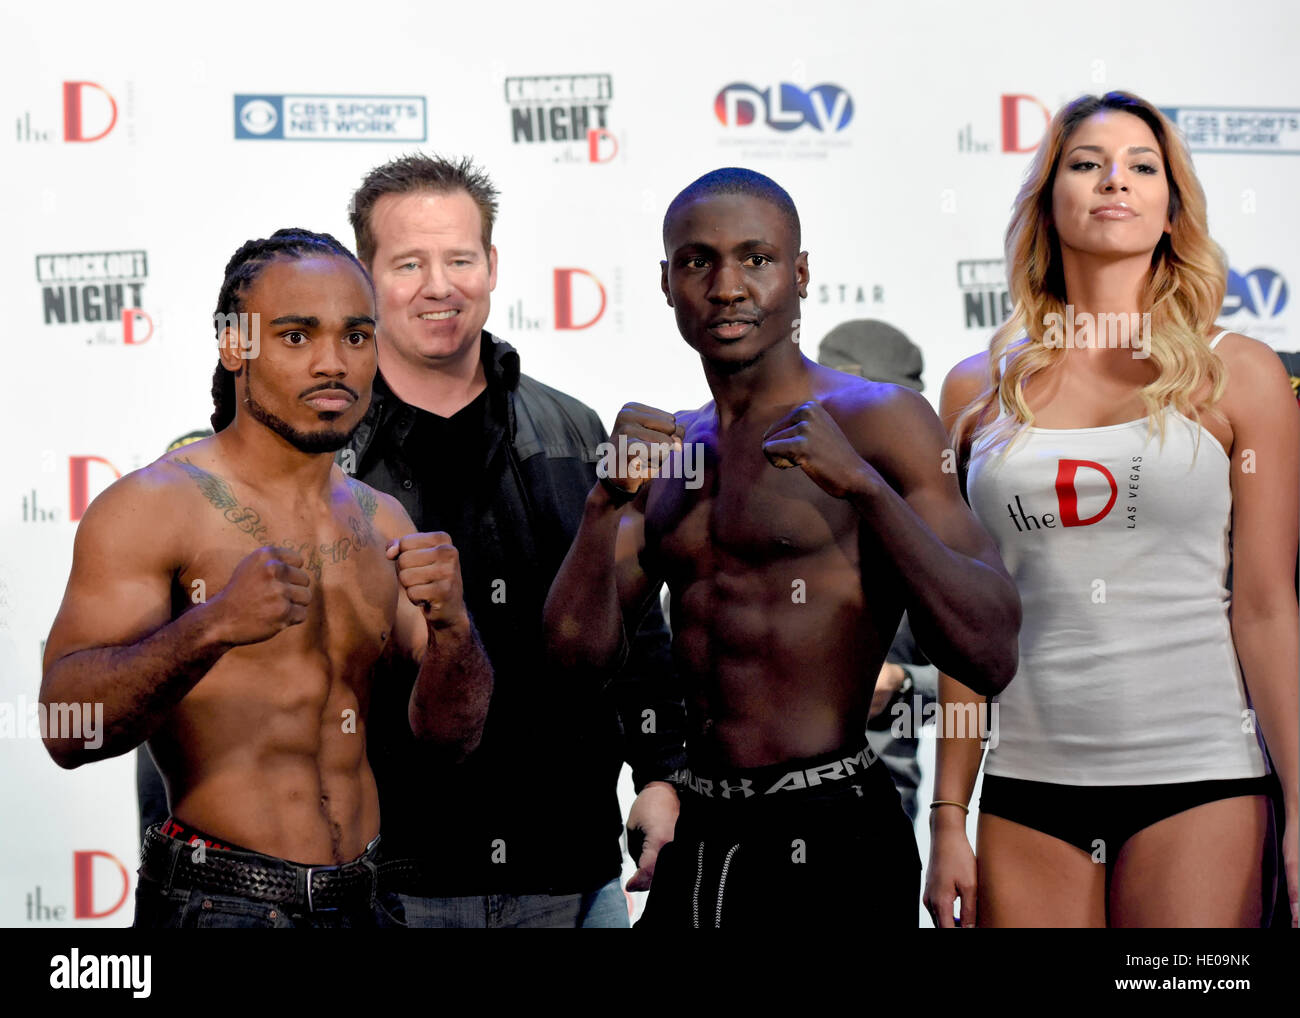 Las Vegas, Nevada December 16, 2016 - Fighters Jeremy 'J-Flash' Nichols and Kevin 'KO' Ottley weigh-in for “Knockout Night at the D”  presented by the D Las Vegas and DLVEC and promoted by Roy Jones Jr. Boxing. Credit: Ken Howard/Alamy Live News Stock Photo